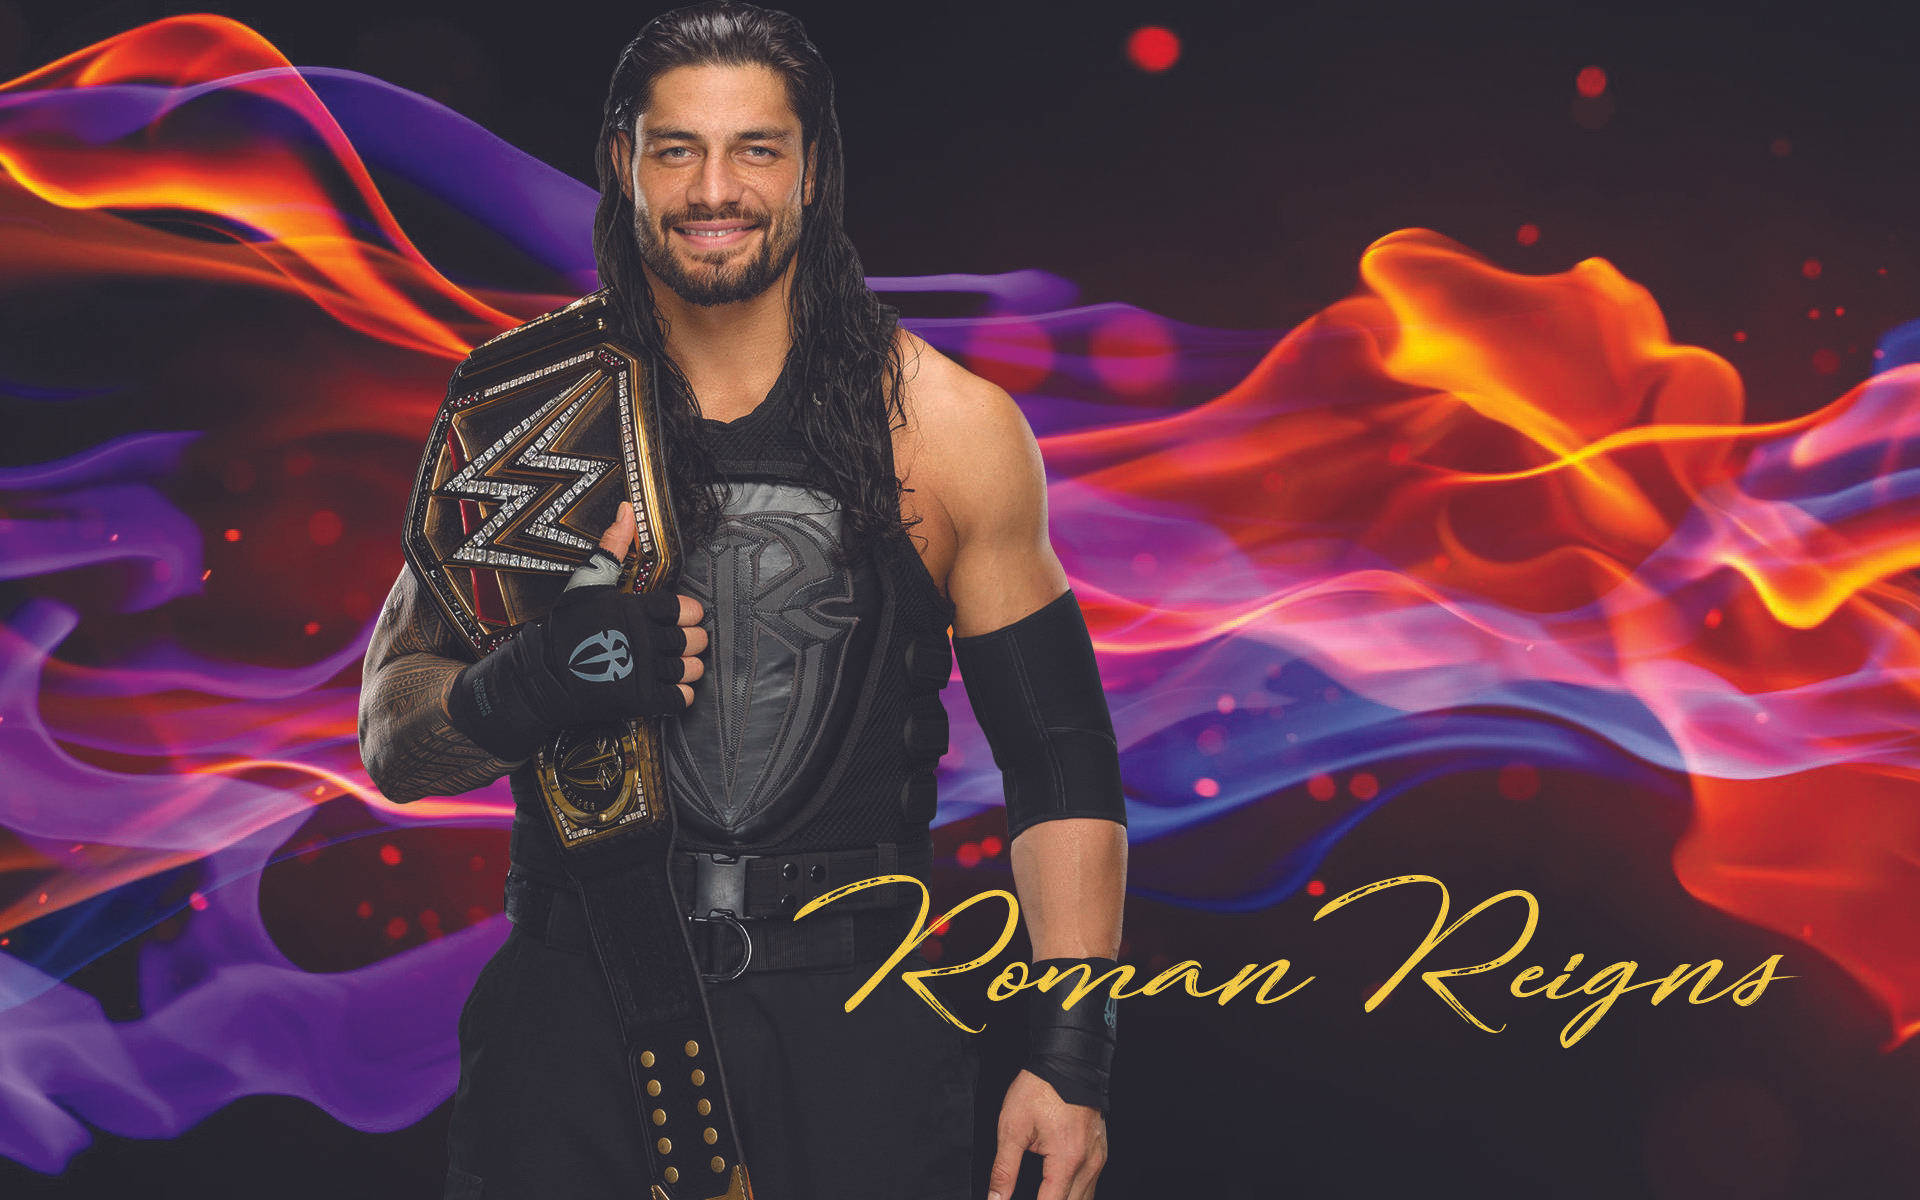 Free Roman Reigns Pictures , [100+] Roman Reigns Pictures for FREE |  